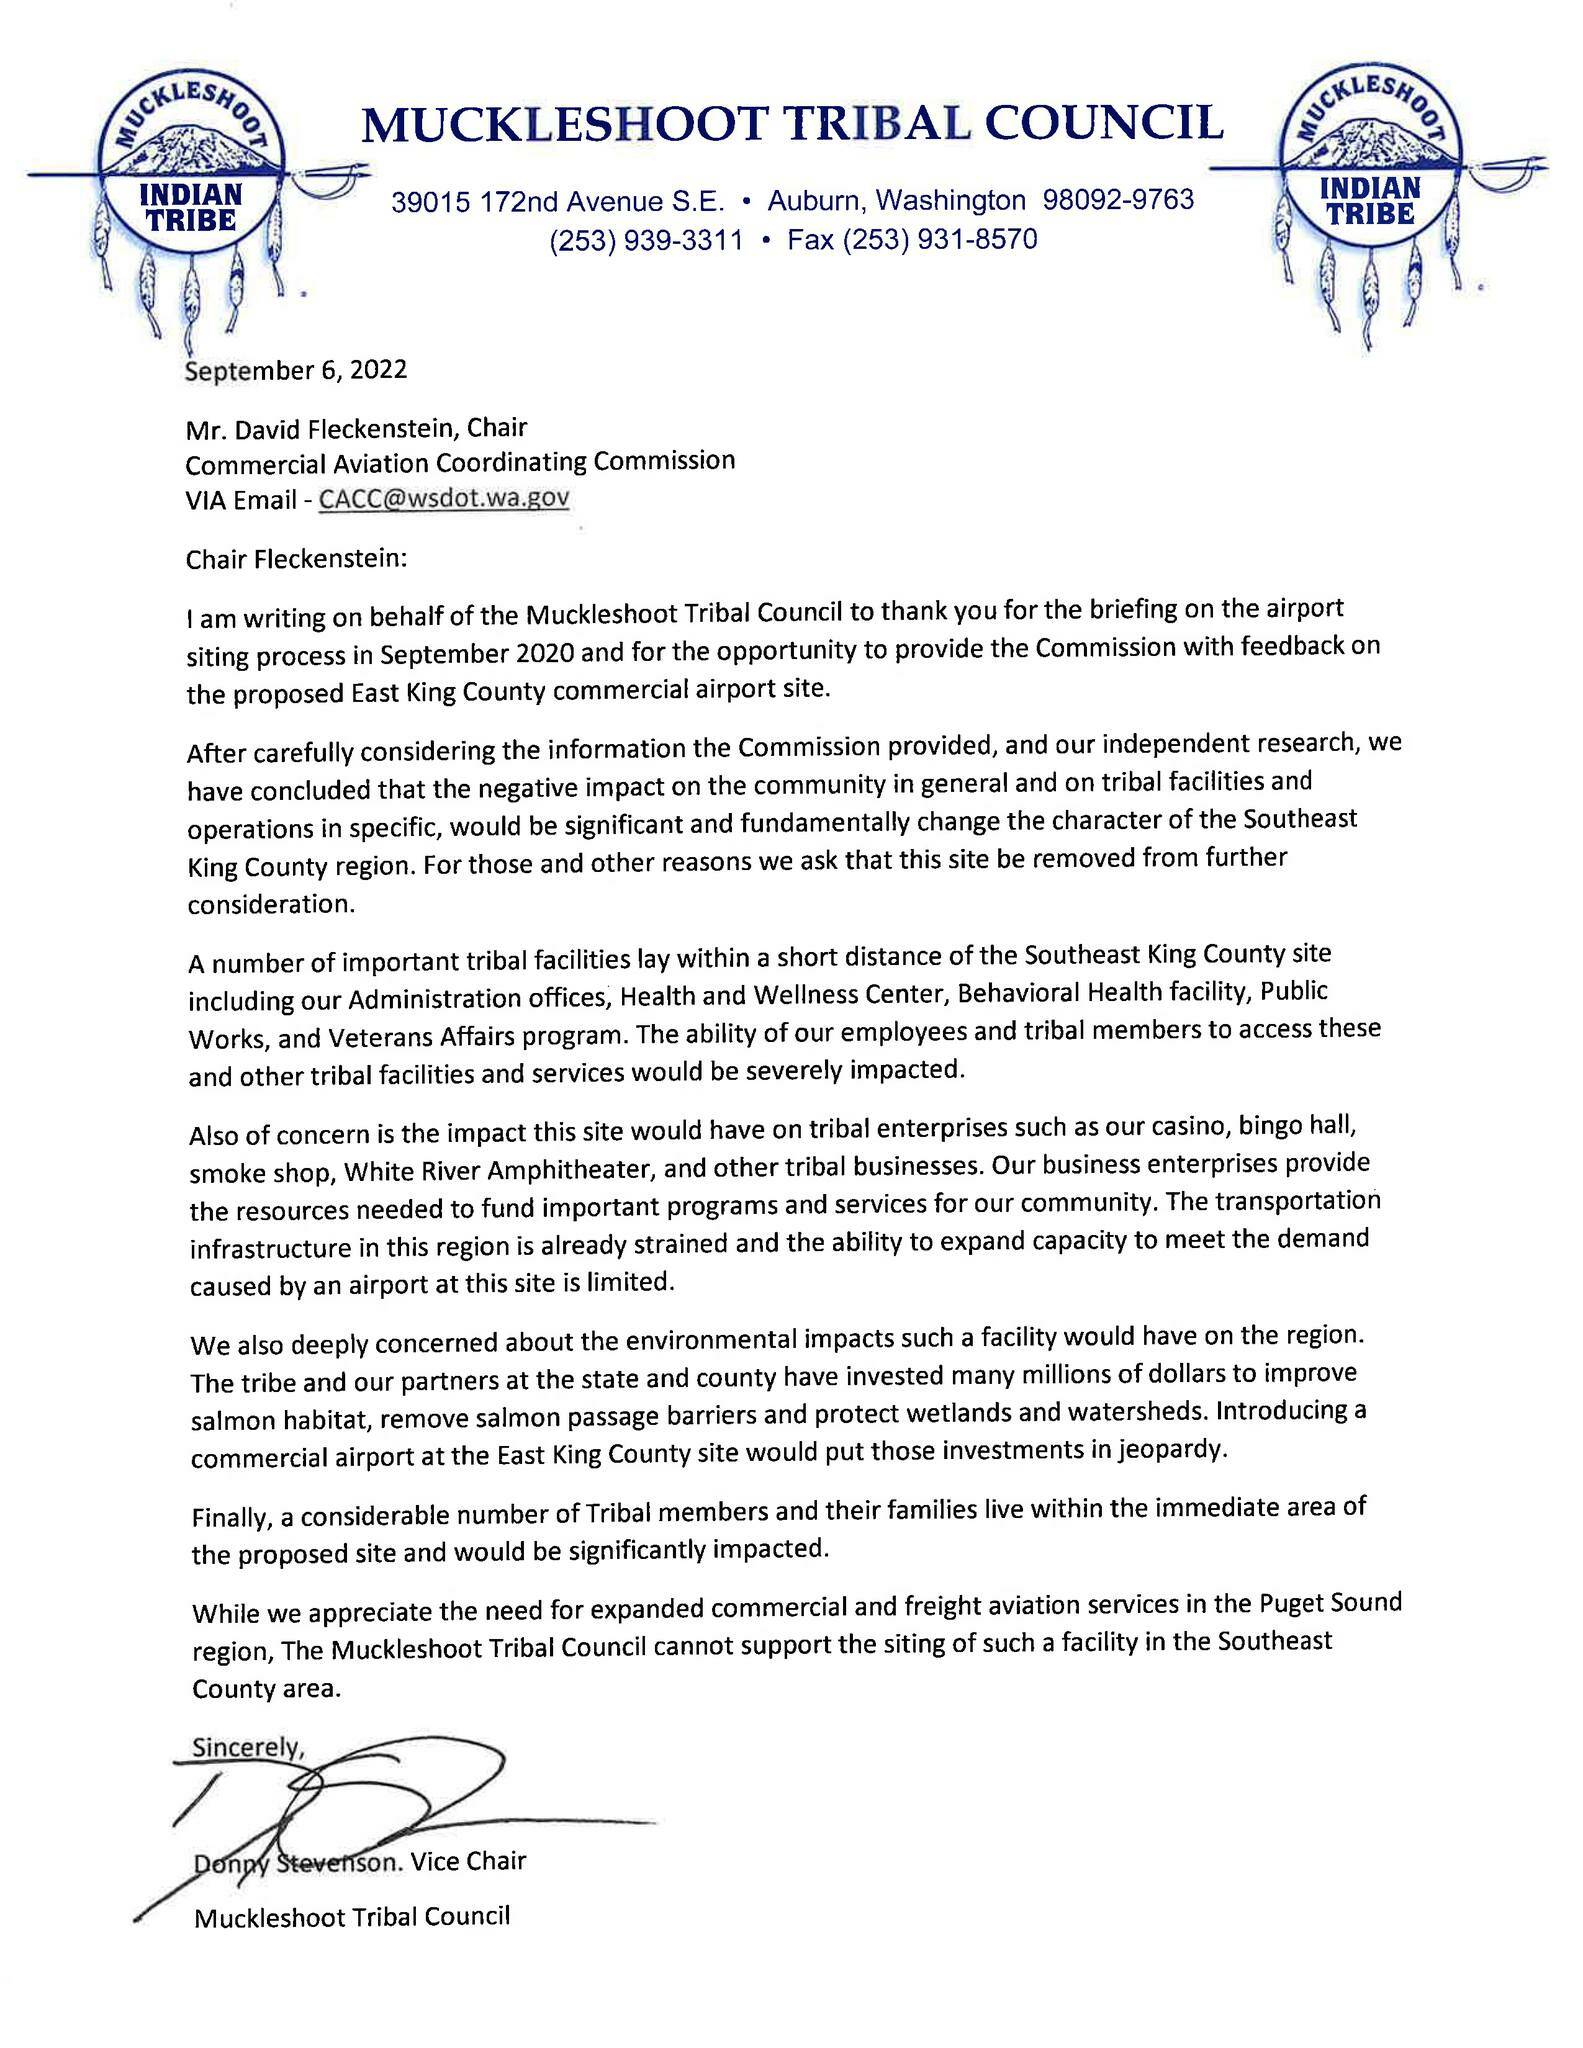 This letter from the Muckleshoot Tribal Council, sent to the Commercial Aviation Coordinating Commission, outlines the council’s perspective on the hypothetical Southeast King County airport.